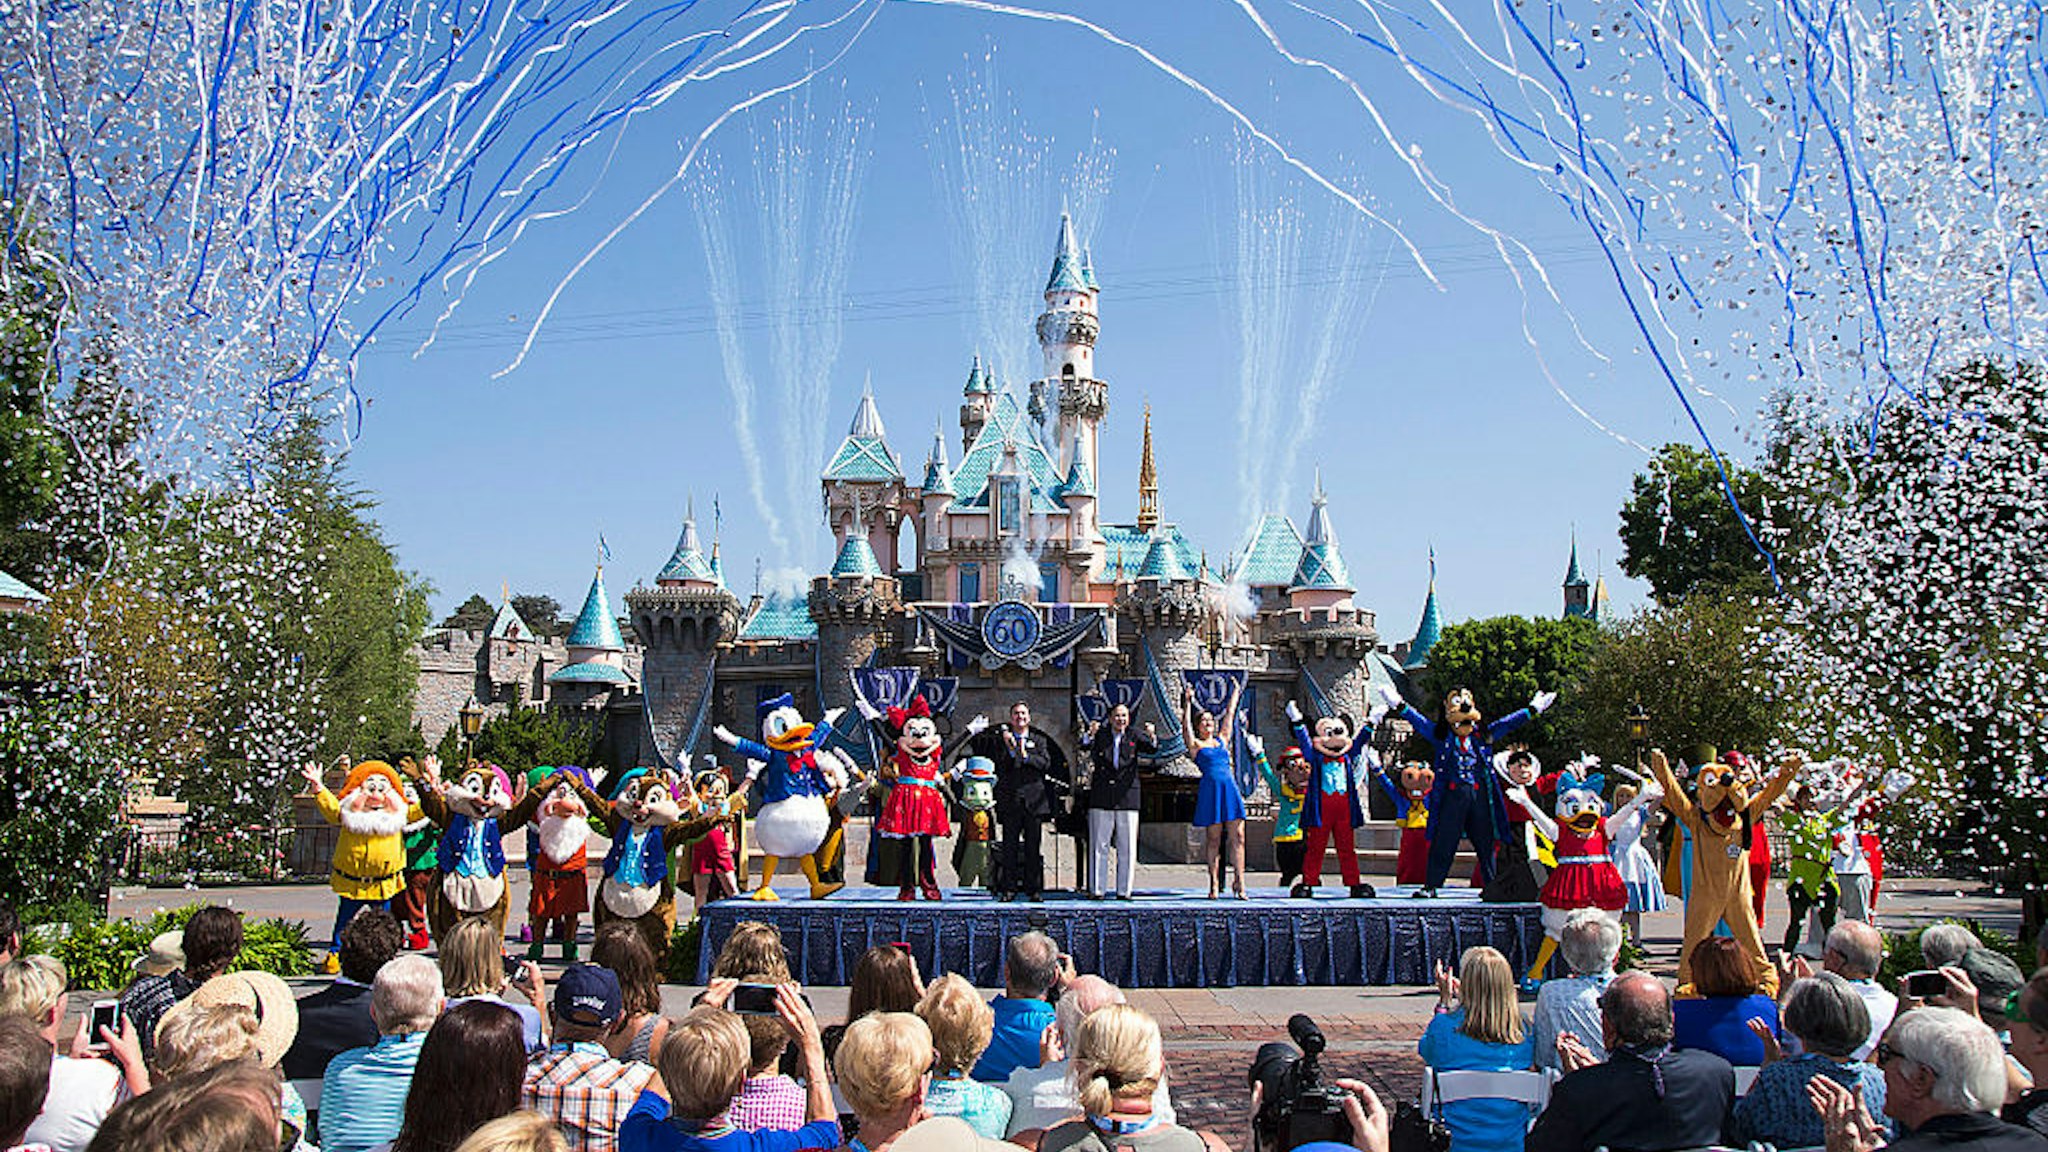 In this handout photo provided by Disney parks, Mickey Mouse and his friends celebrate the 60th anniversary of Disneyland park during a ceremony at Sleeping Beauty Castle featuring Academy Award-winning composer, Richard Sherman and Broadway actress and singer Ashley Brown July 17, 2015 in Anaheim, California.